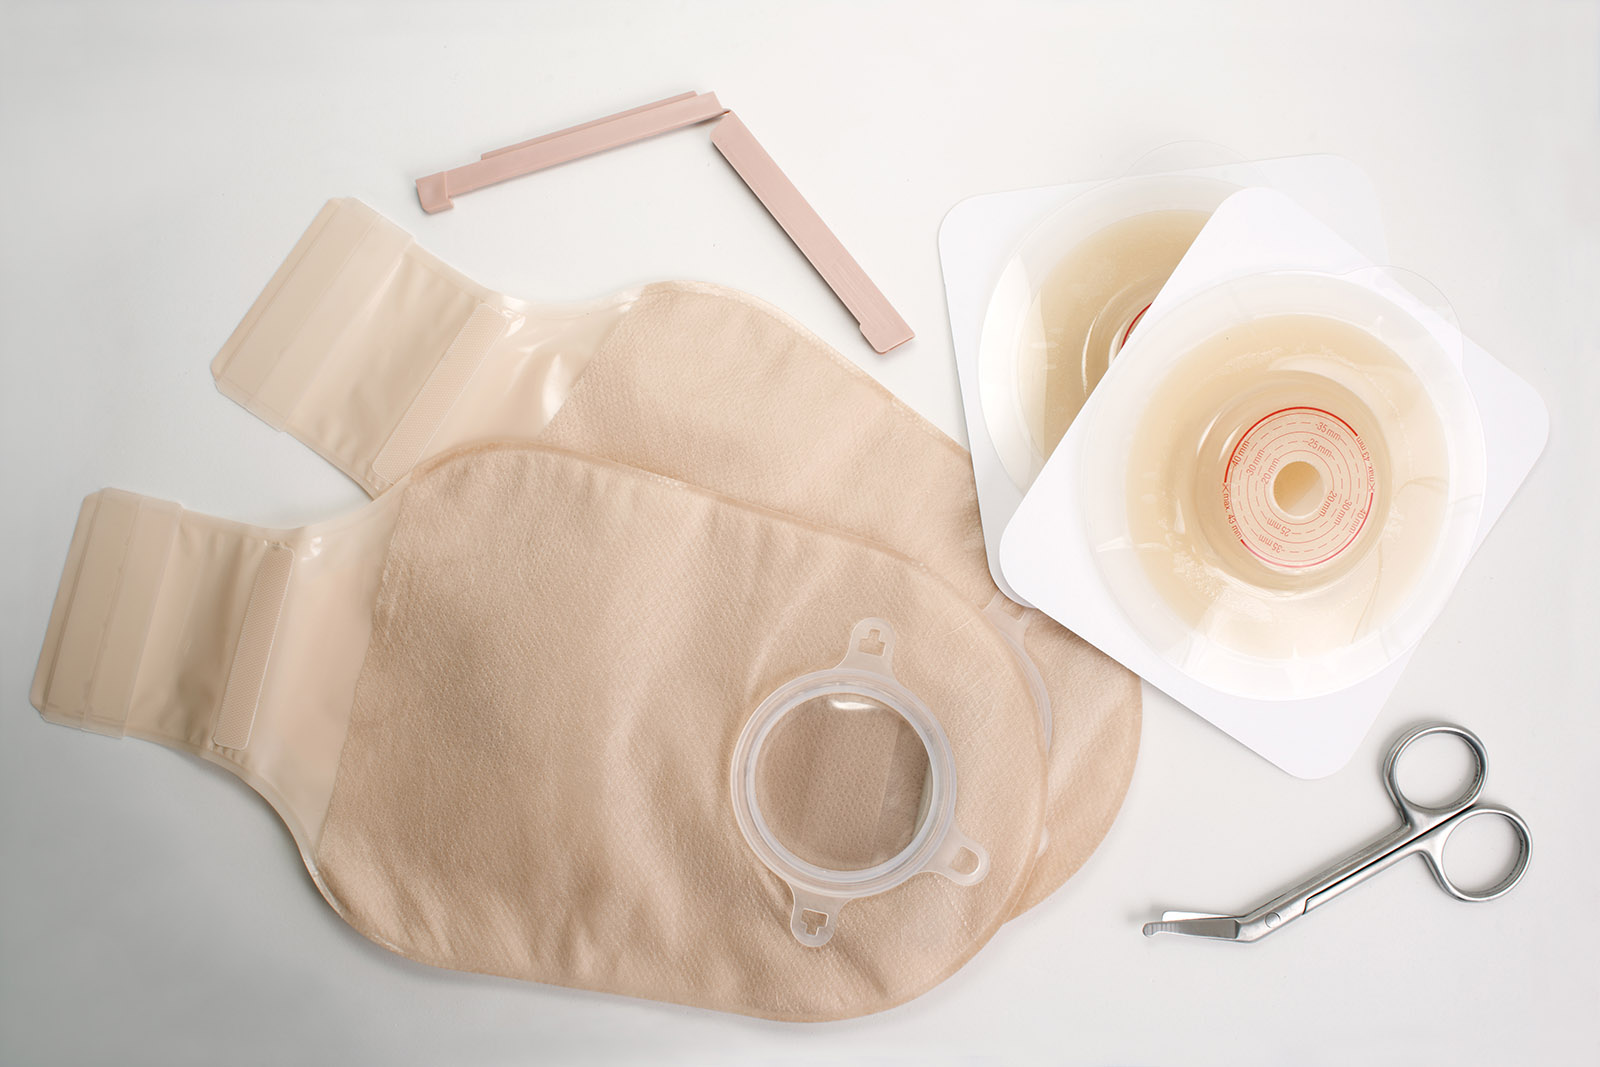 Know Your Ostomy Pouching System & Supplies - United Ostomy